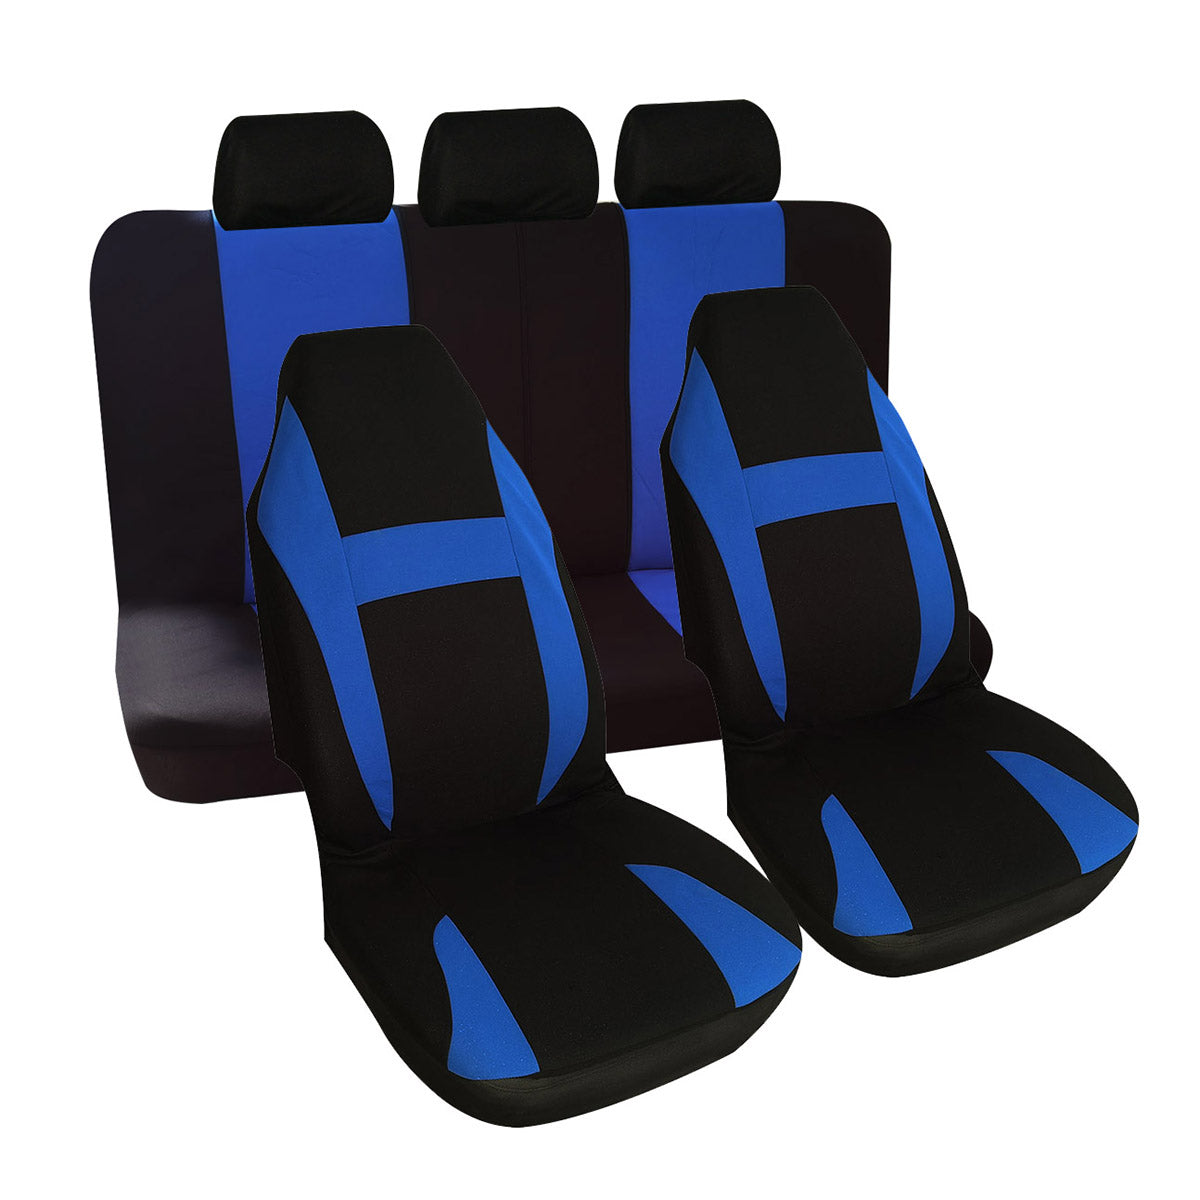 Dark Slate Blue 7PCS Universal Front Seat Covers Set Fit For Auto Car SUV Trucks